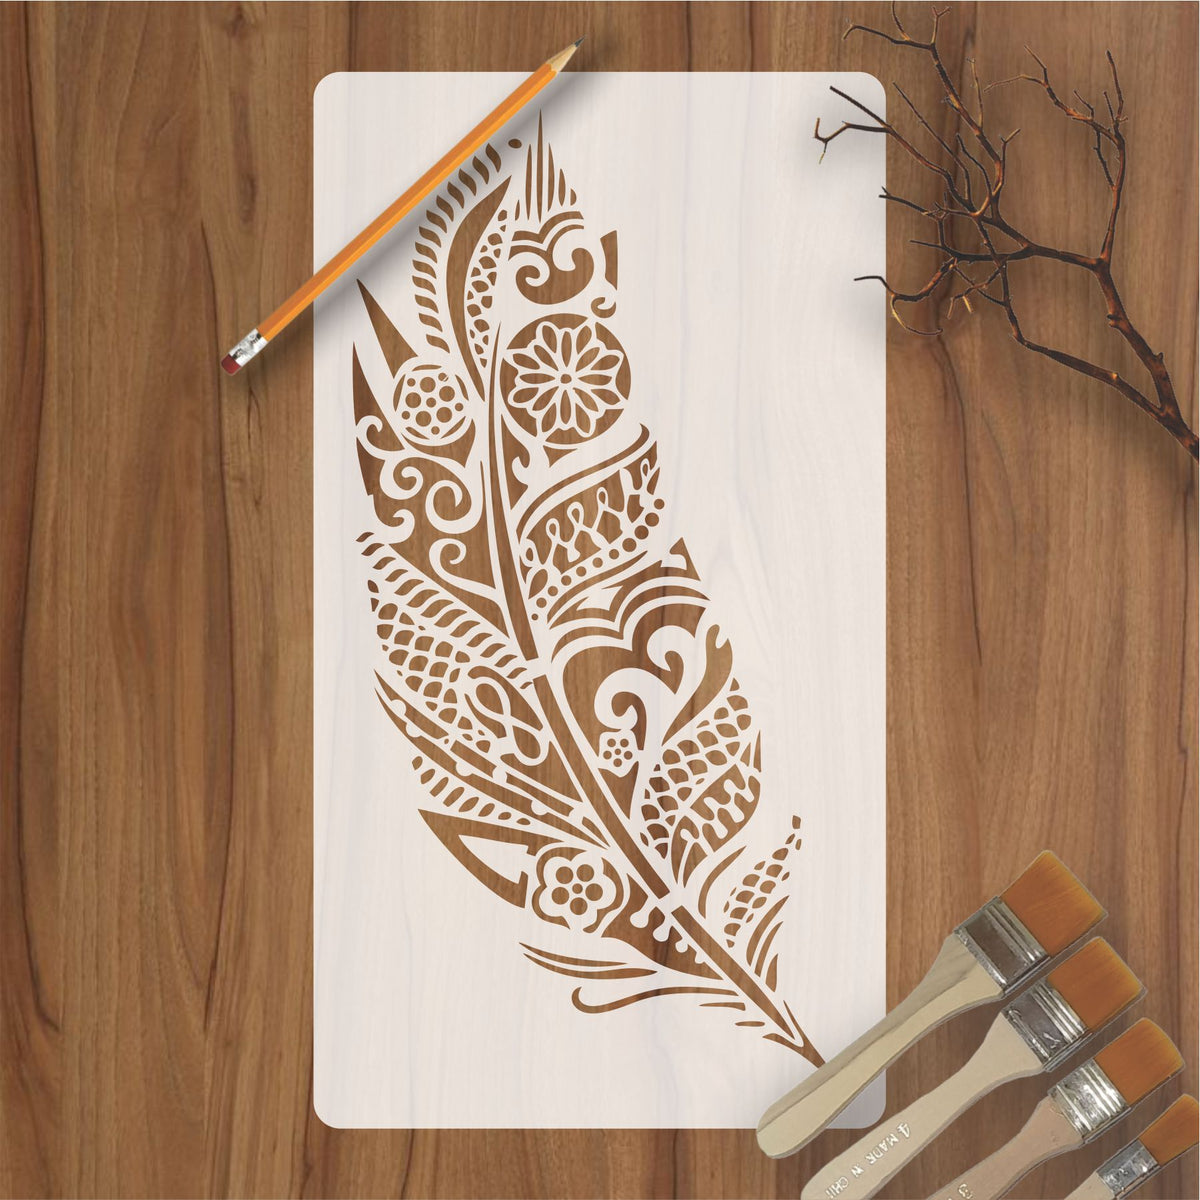 Stencils for Painting on Wood,Wall Home Decor,A4 29x21cm Mandala Feather  Tassel Net DIY Reusable Stencils Painting Scrapbook Art Templates for